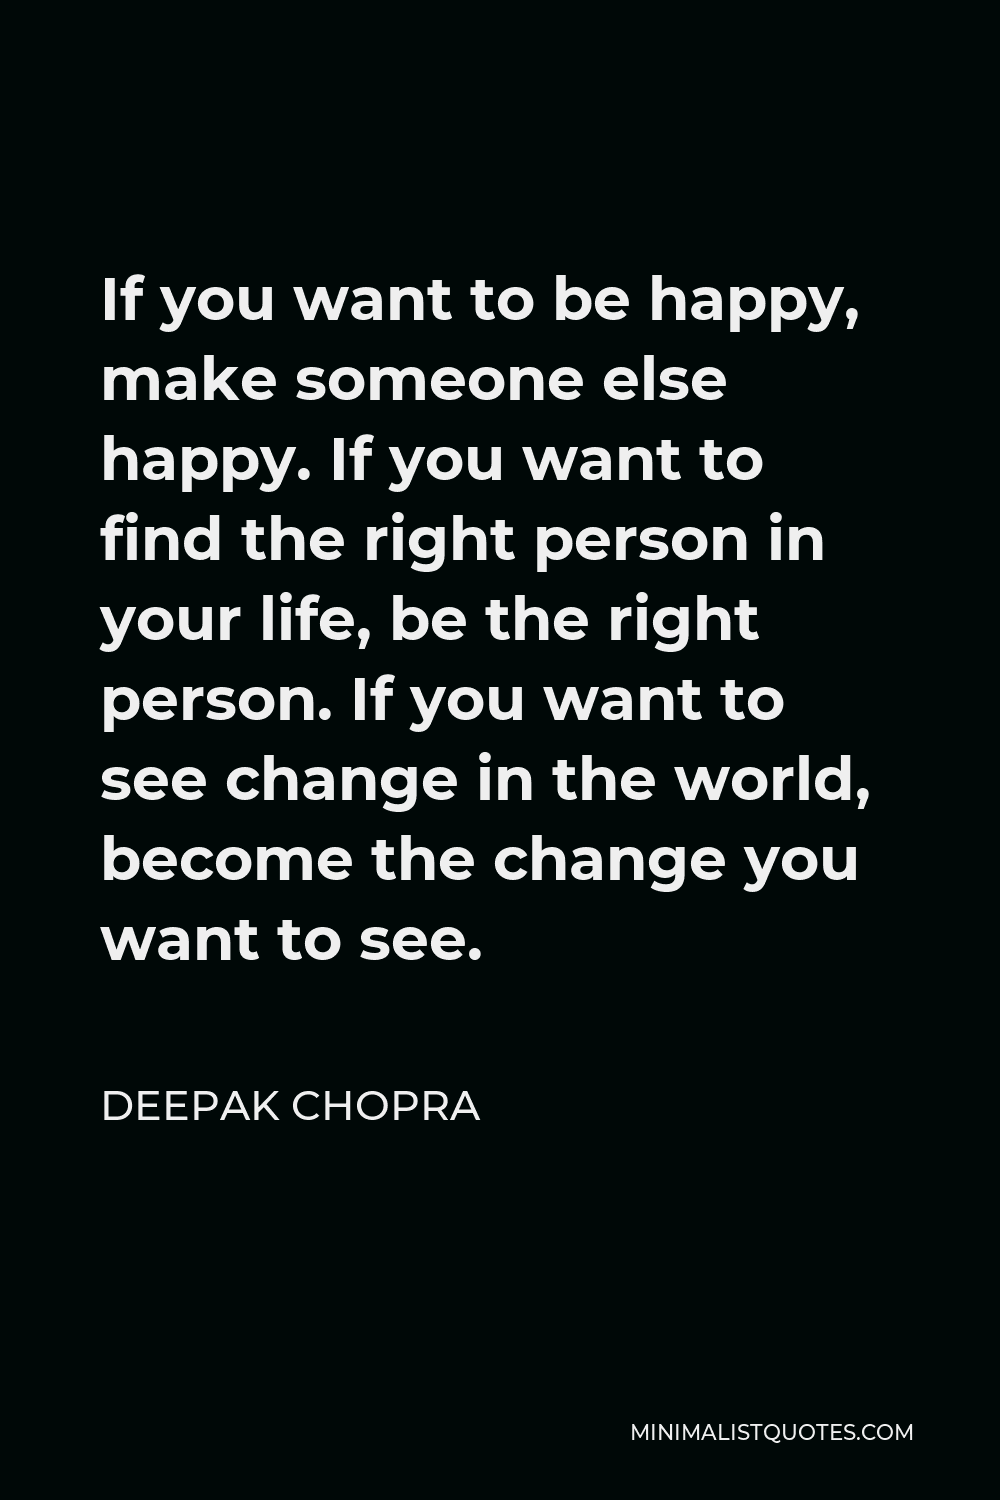 Deepak Chopra Quote If You Want To Be Happy Make Someone Else Happy If You Want To Find The Right Person In Your Life Be The Right Person If You Want To